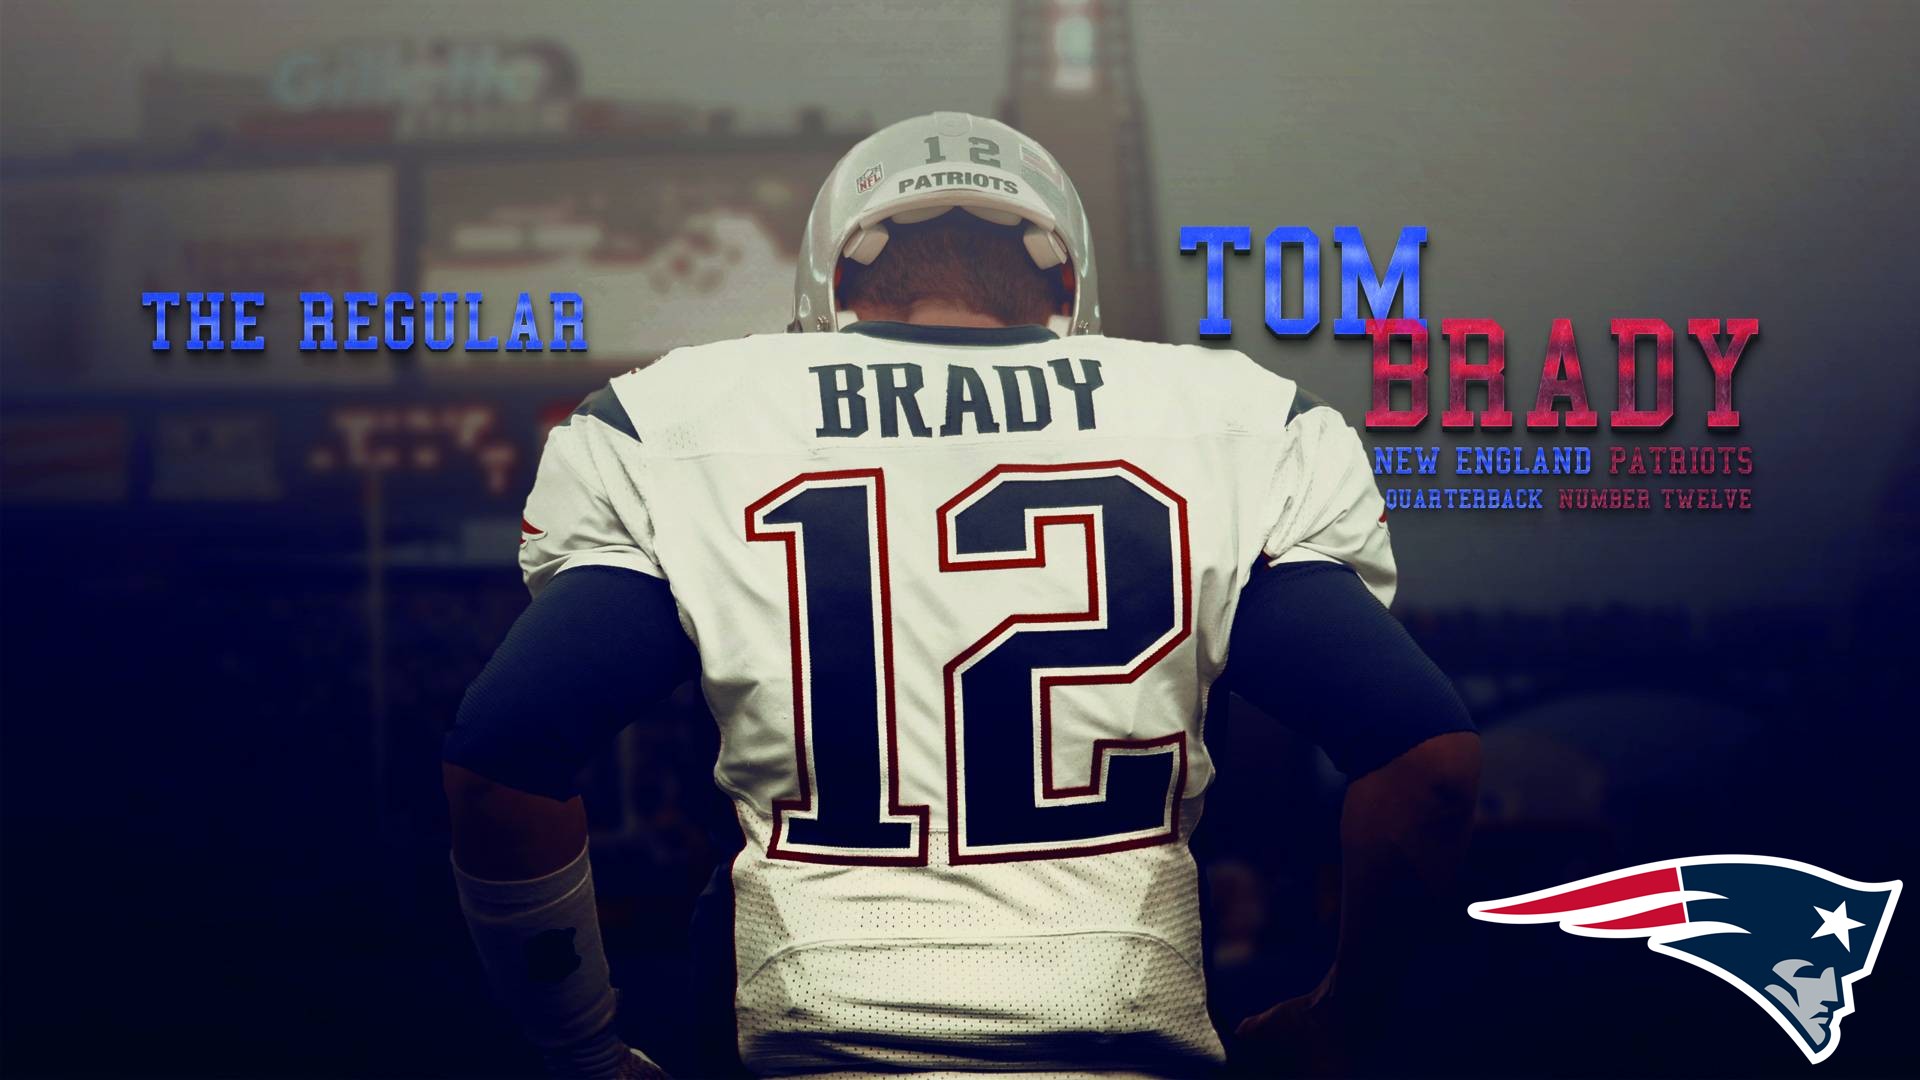 Tom Brady Patriots HD Wallpapers With Resolution 1920X1080 pixel. You can make this wallpaper for your Mac or Windows Desktop Background, iPhone, Android or Tablet and another Smartphone device for free